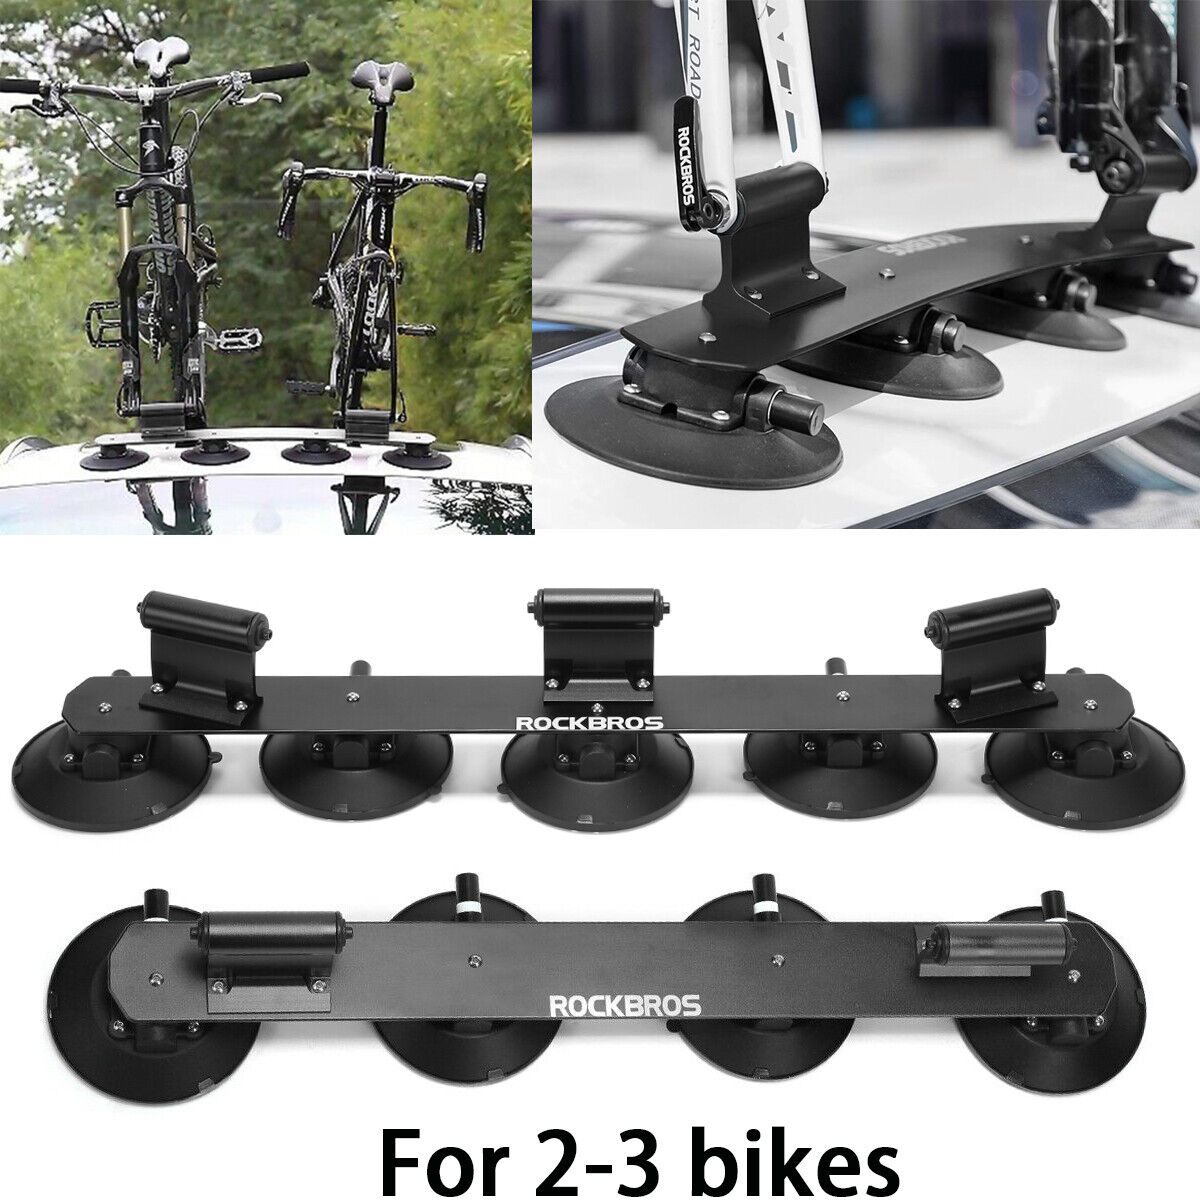 ROCKBROS Bike Bicycle Rack Carrier Suction Roof-top Quick In